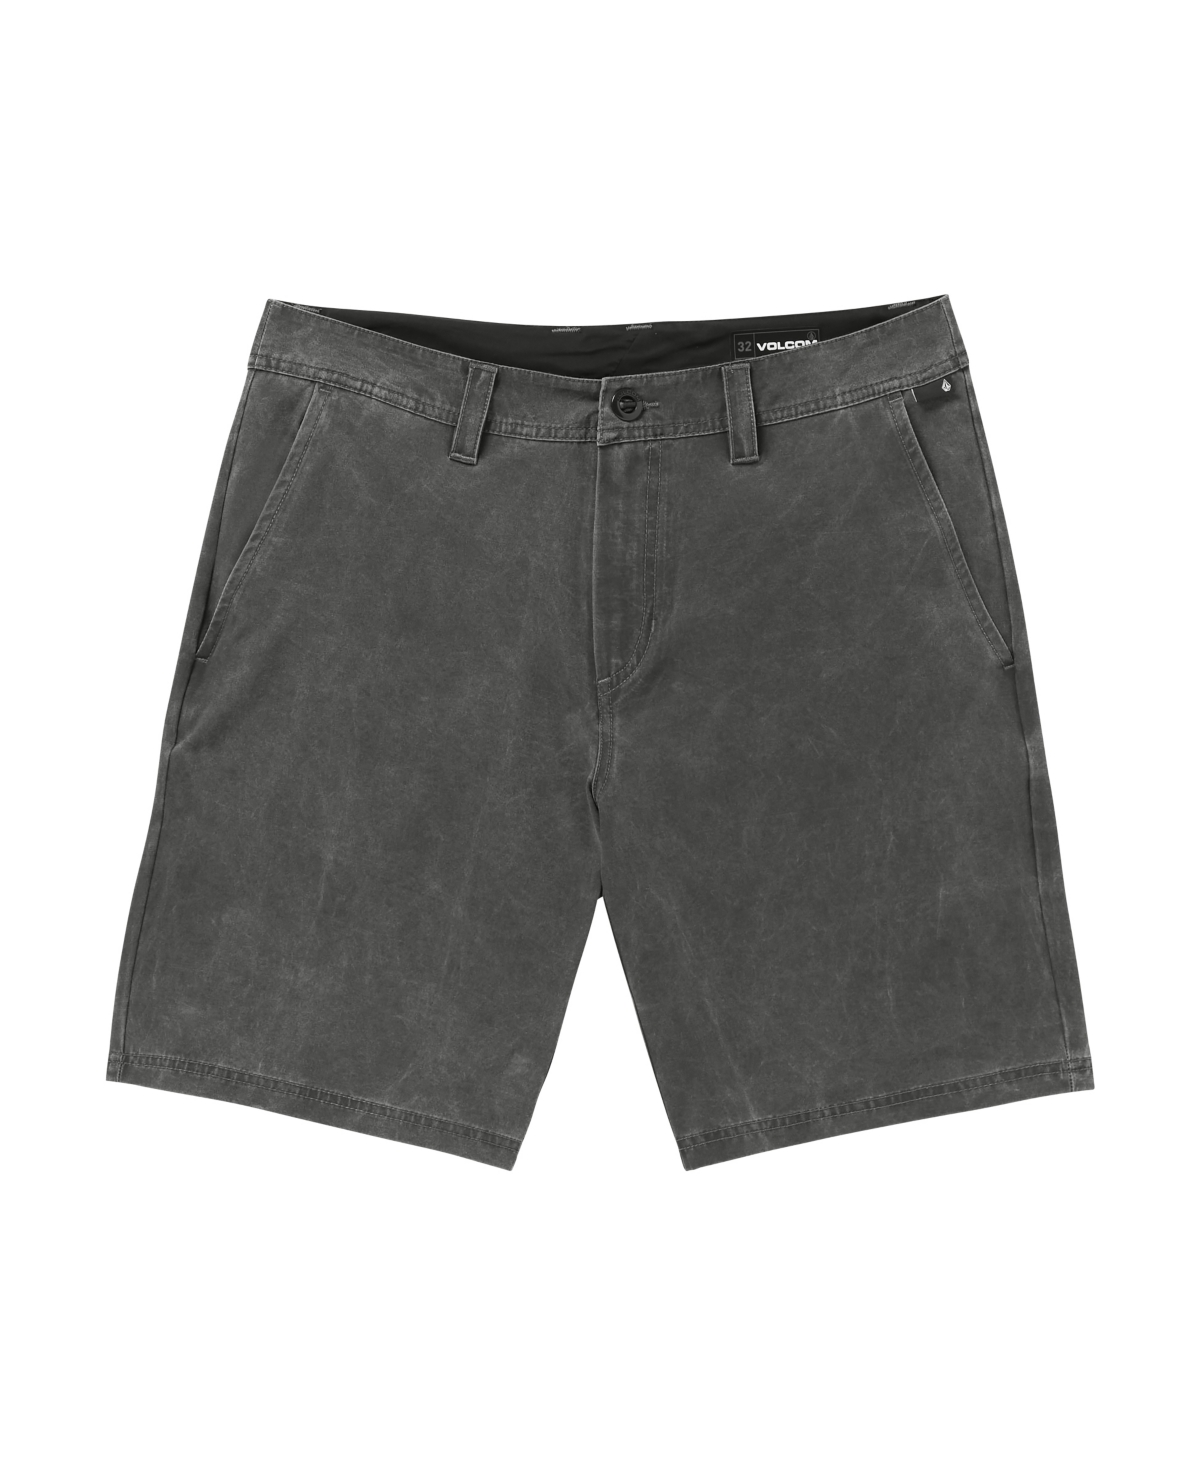 Men's Stone Faded Hybrid 19" Shorts - Stealth